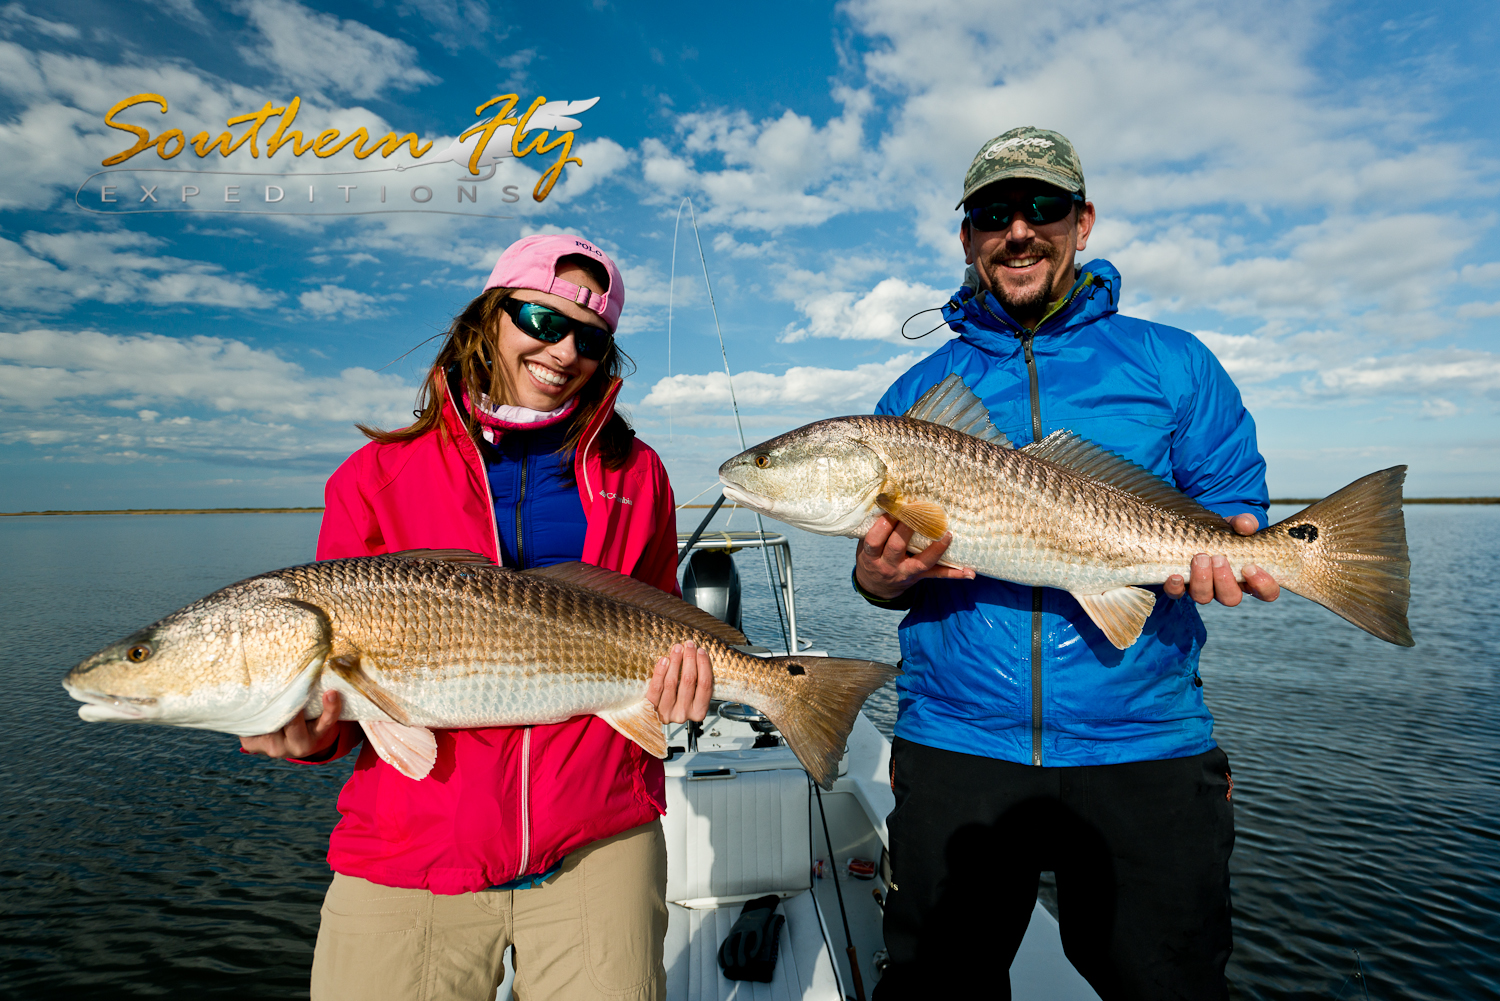 January 2015 Fly Fishing Photos with Southern Fly Expeditions